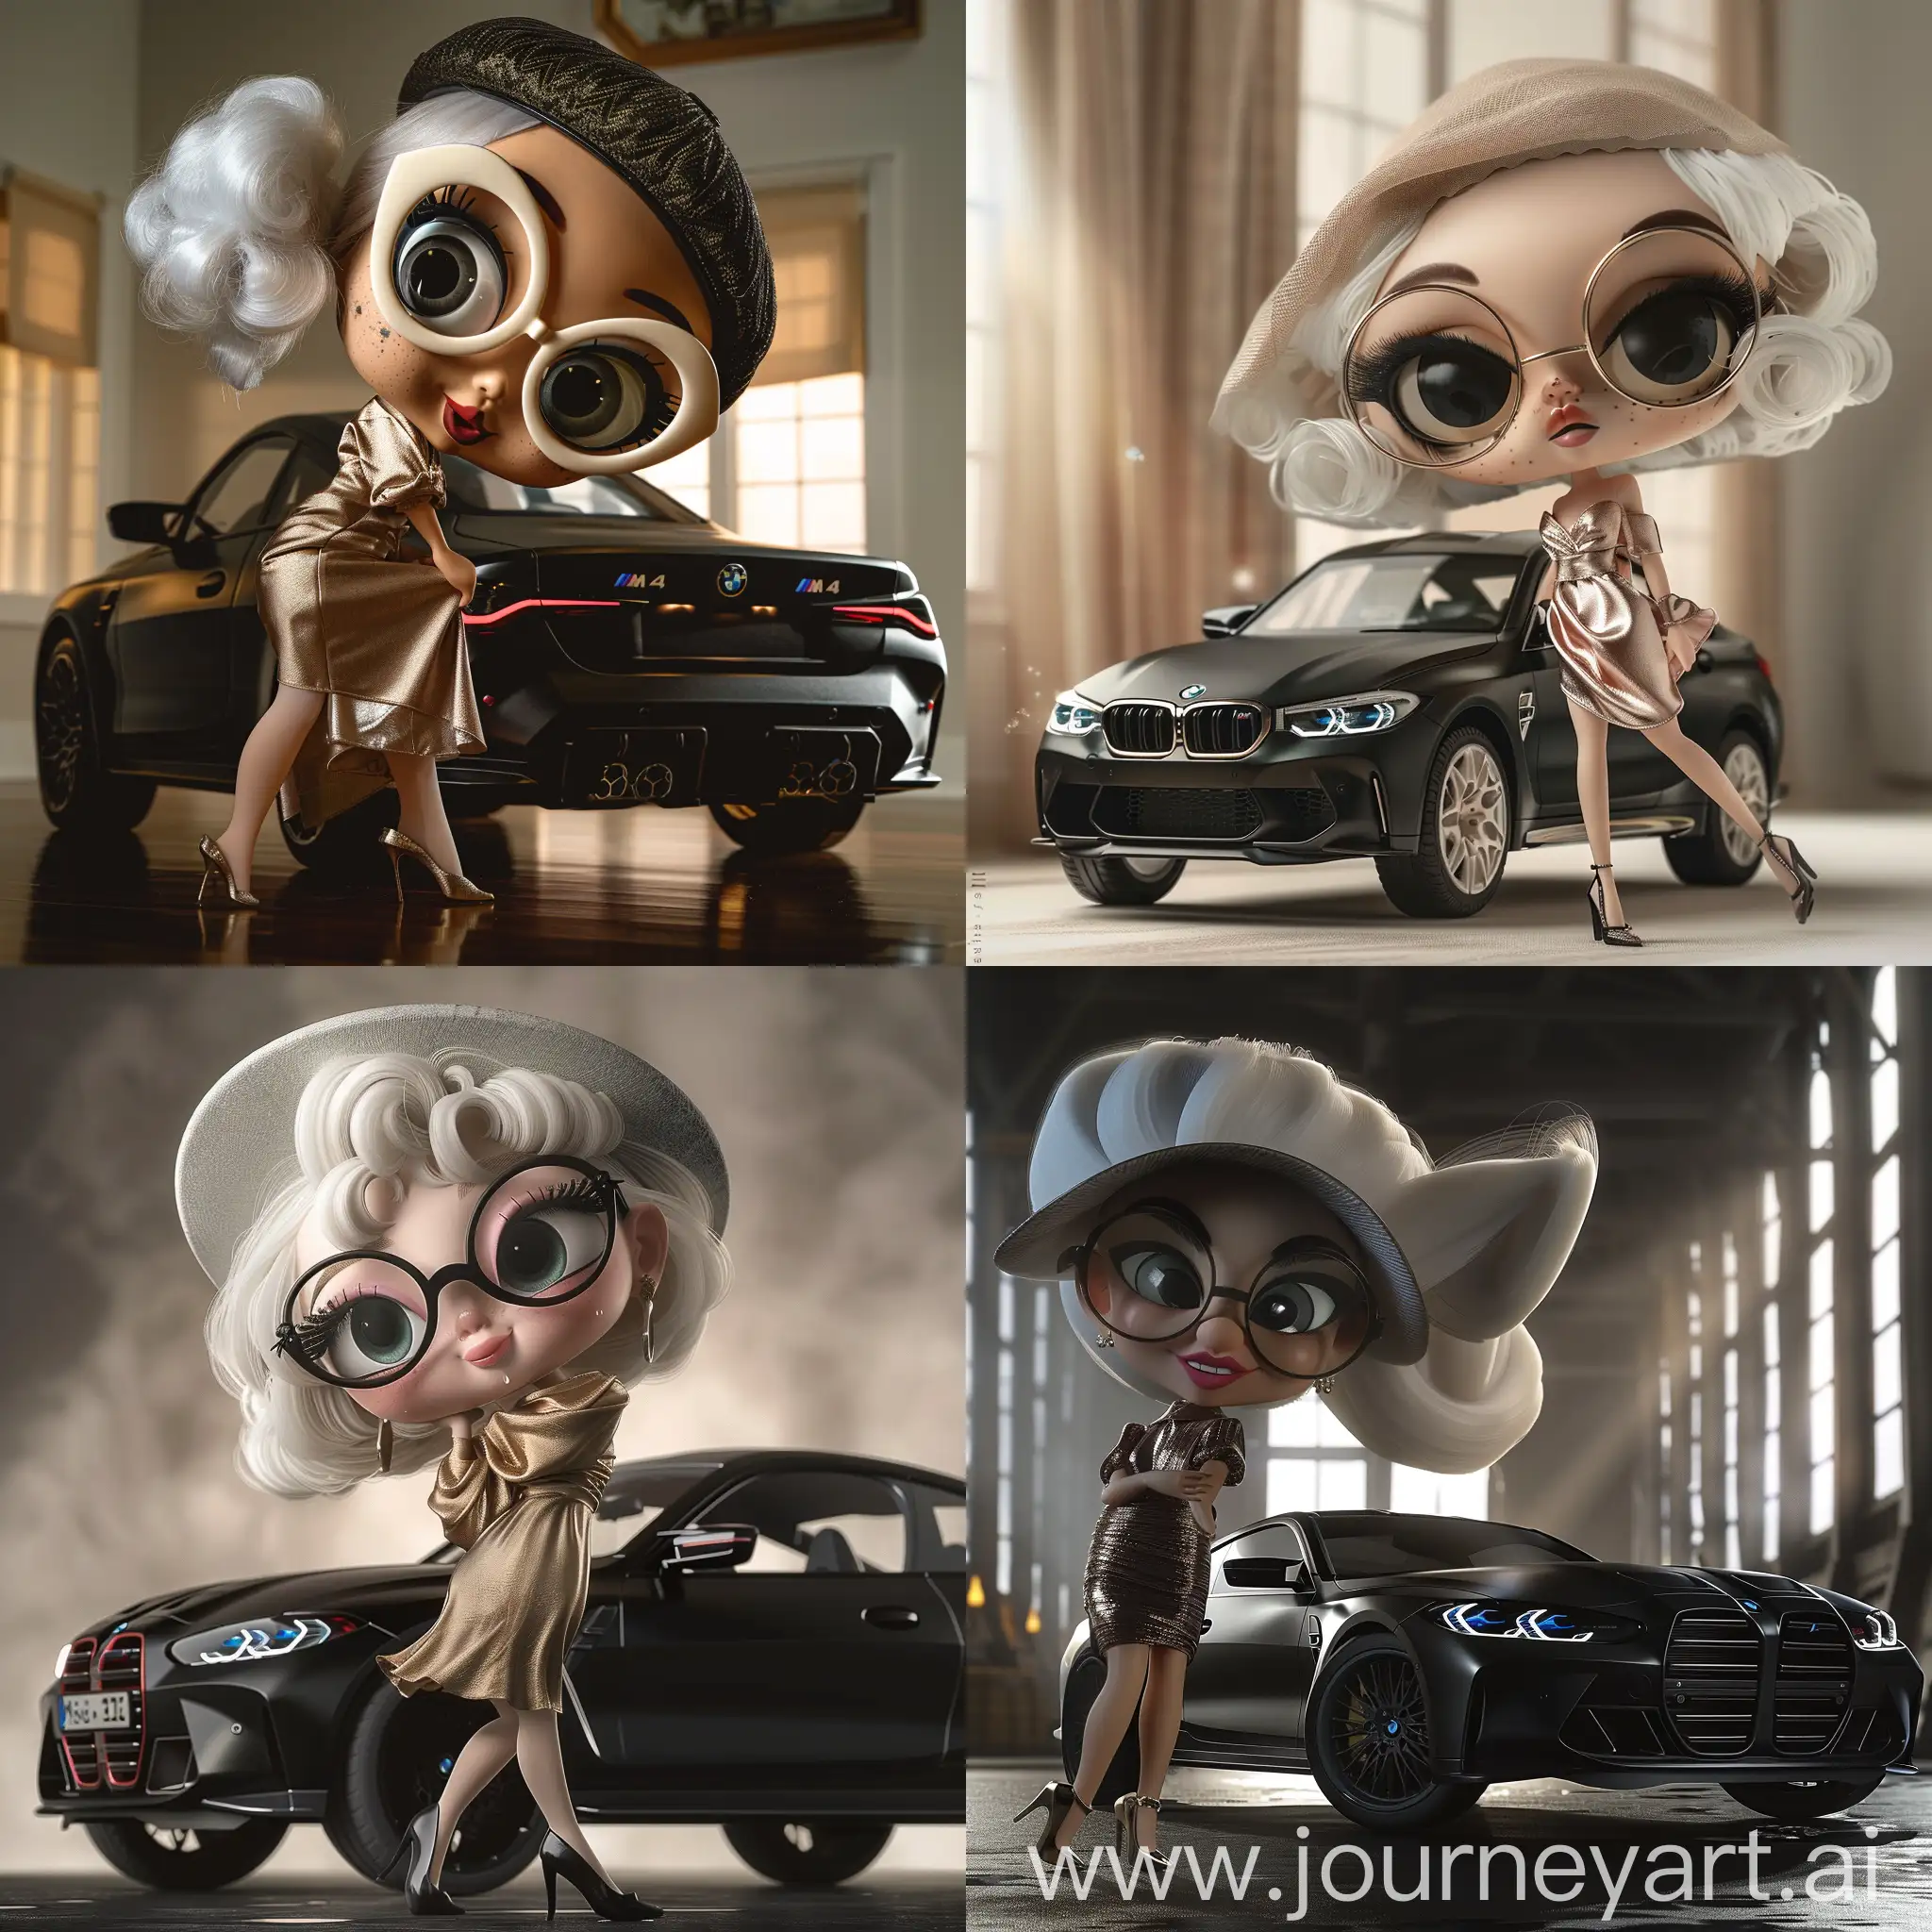 Vintage photo shoot, 1950s Chibi model, cheeky pose looking over shoulder, stilettos, silk dress and hat, 1980s white hairstyle, round glasses, high heels, posing with a 2023 black BMW M4, huge Chibi eyes, large head, small chubby body, soft light, f/11 fantasy photo